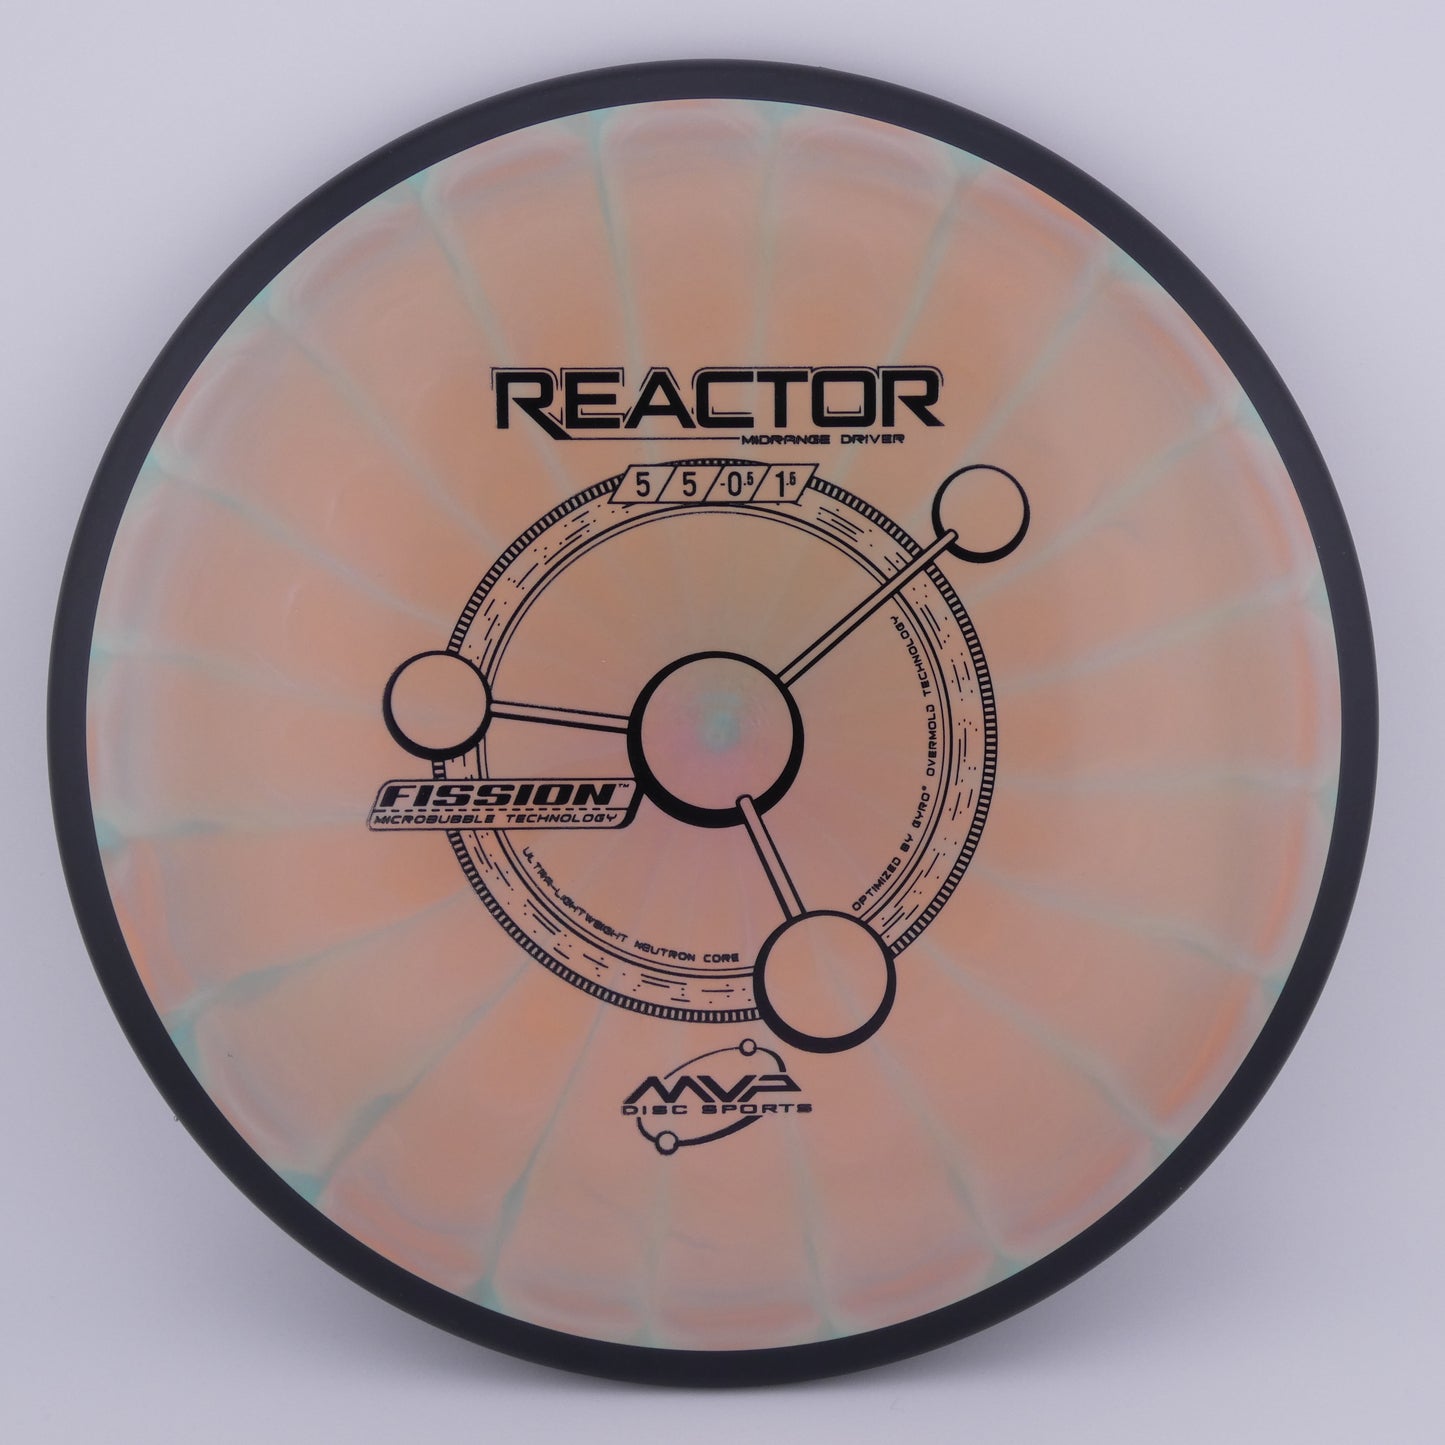 Fission Reactor 160-164g